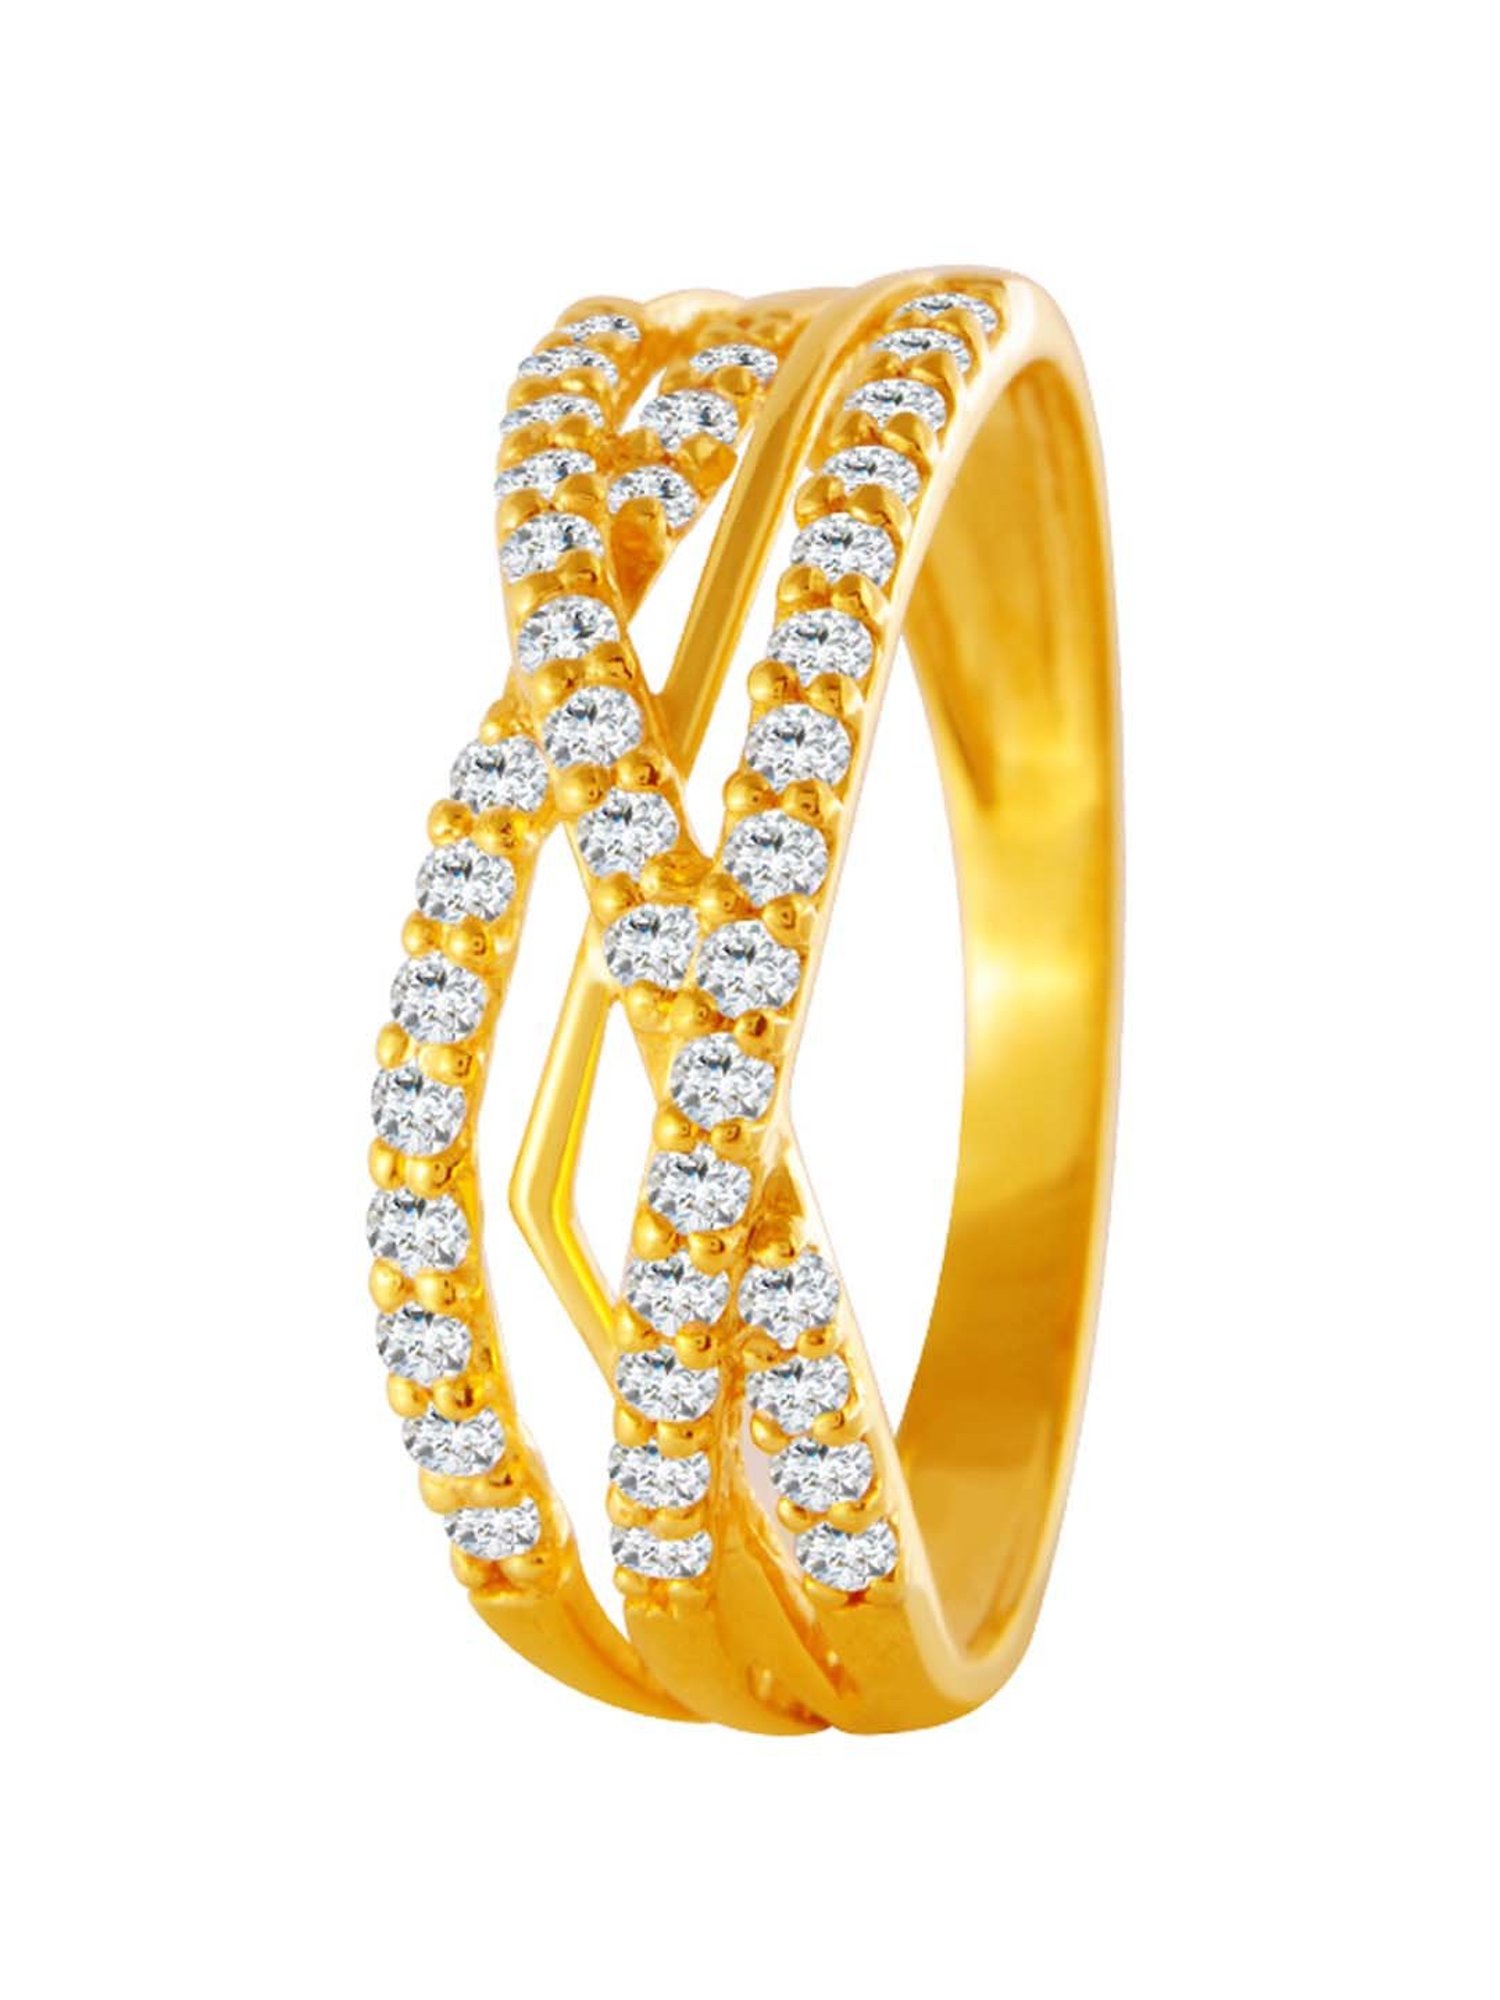 PC Chandra Jewellers Valentine's Day 14kt Yellow Gold ring Price in India -  Buy PC Chandra Jewellers Valentine's Day 14kt Yellow Gold ring online at  Flipkart.com